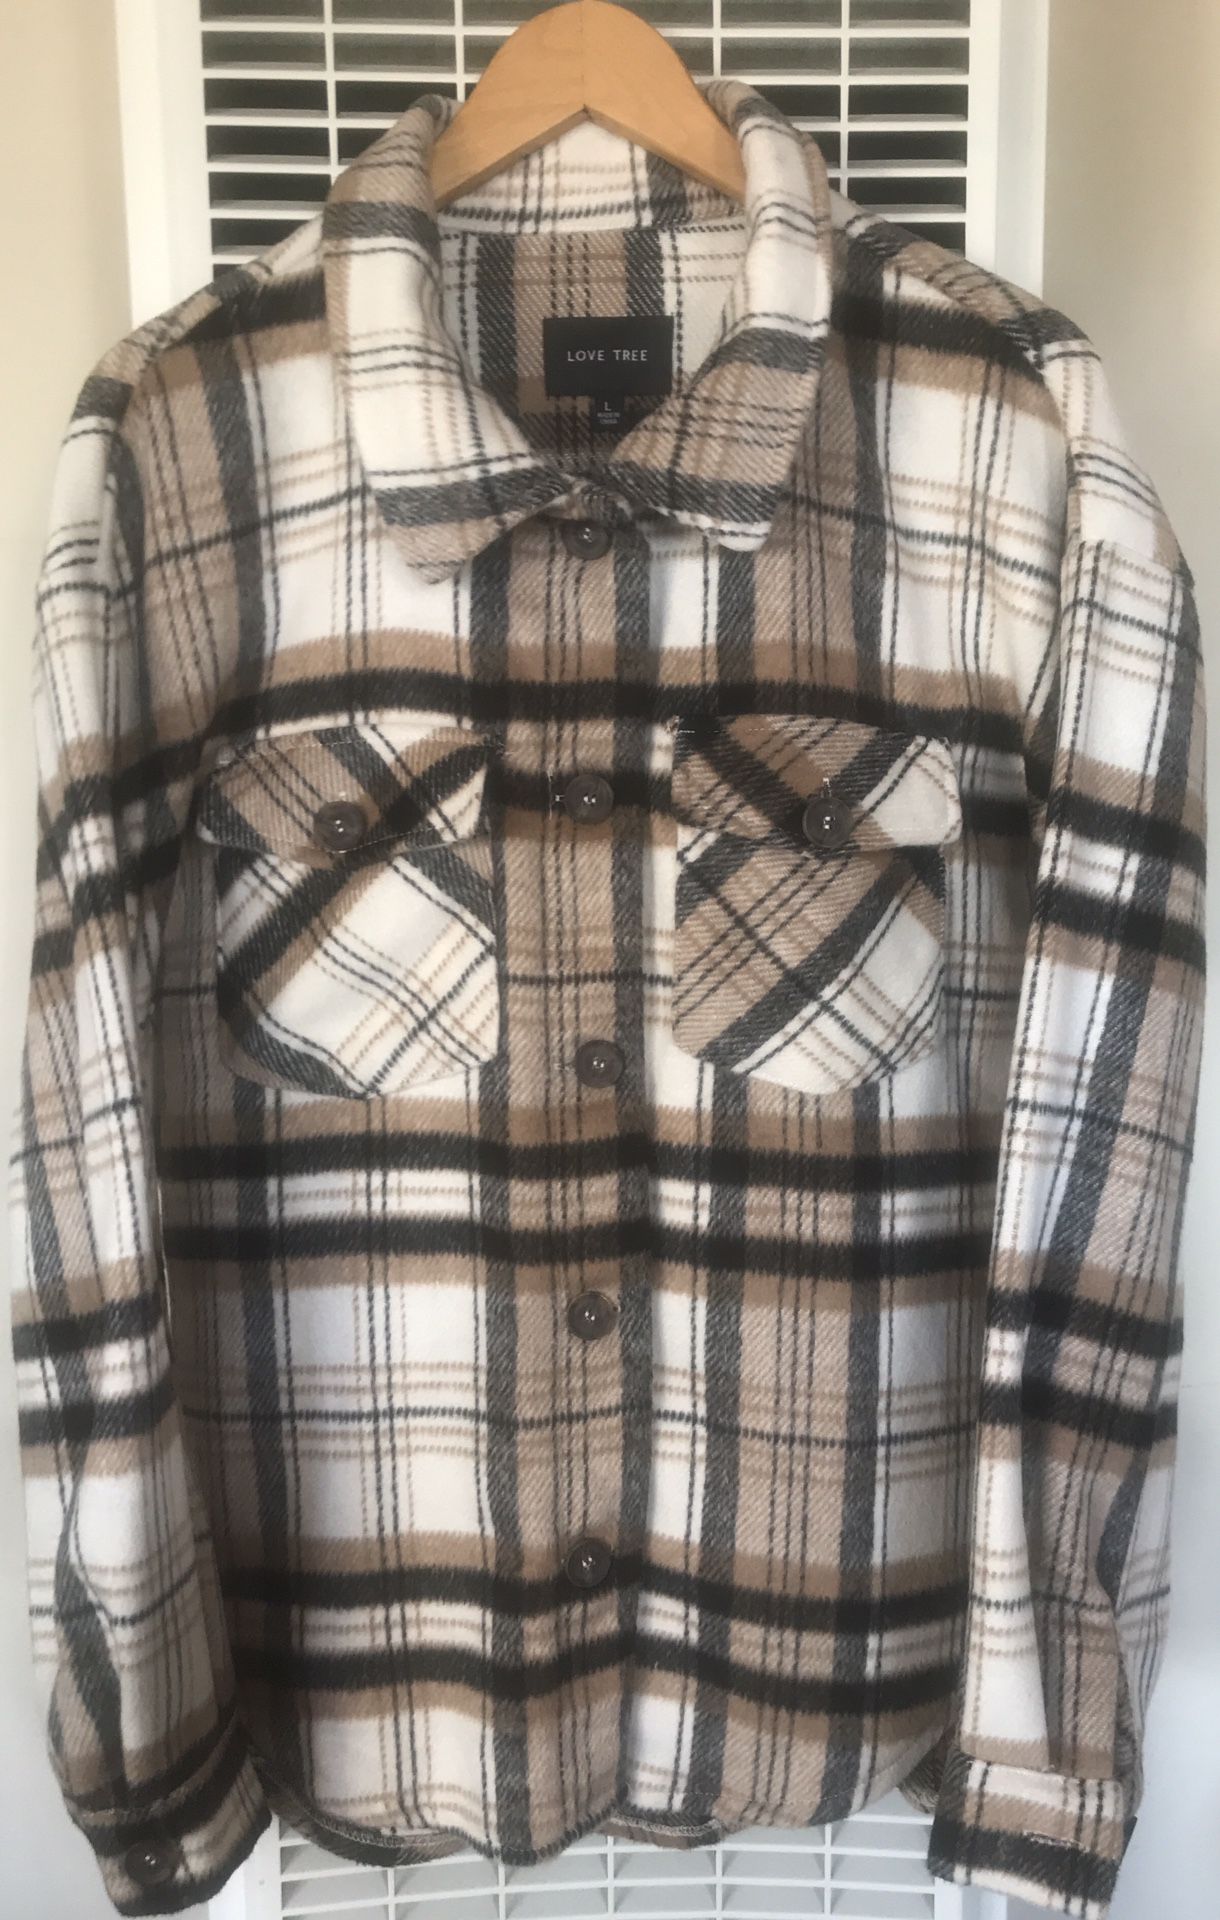 (LIKE NEW) WOMEN’S LIVE TREE PLAID BUTTON DOWN SHIRT/COAT SHACKET - SIZE: LARGE (MSRP: $39.99)